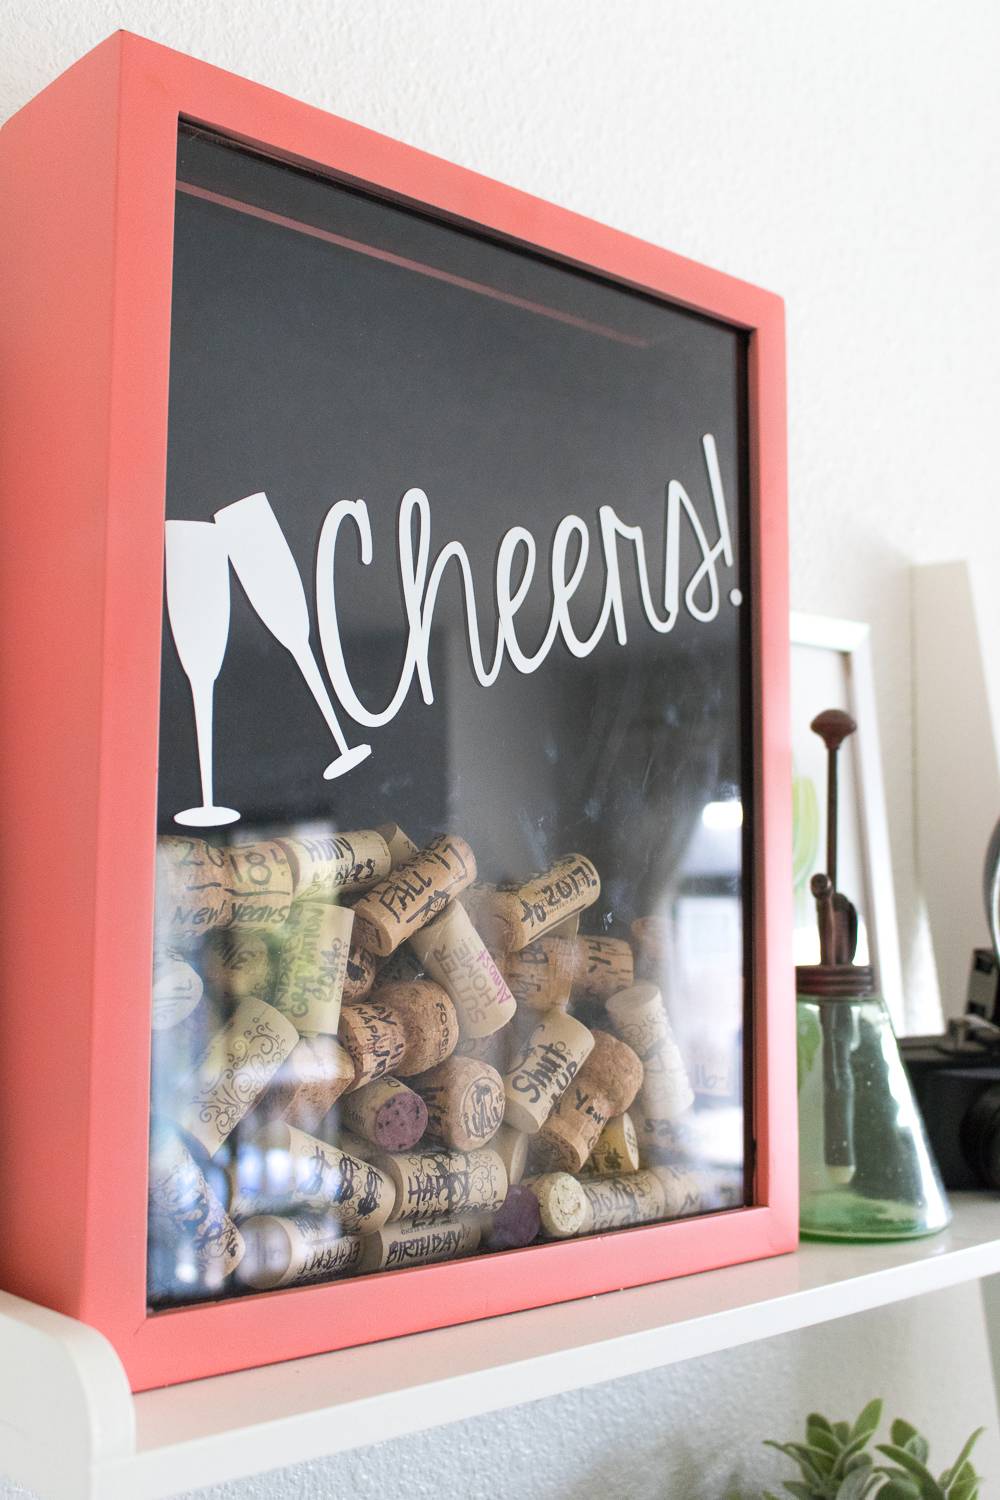 Corks are put into a red framed box with the word cheers on it.